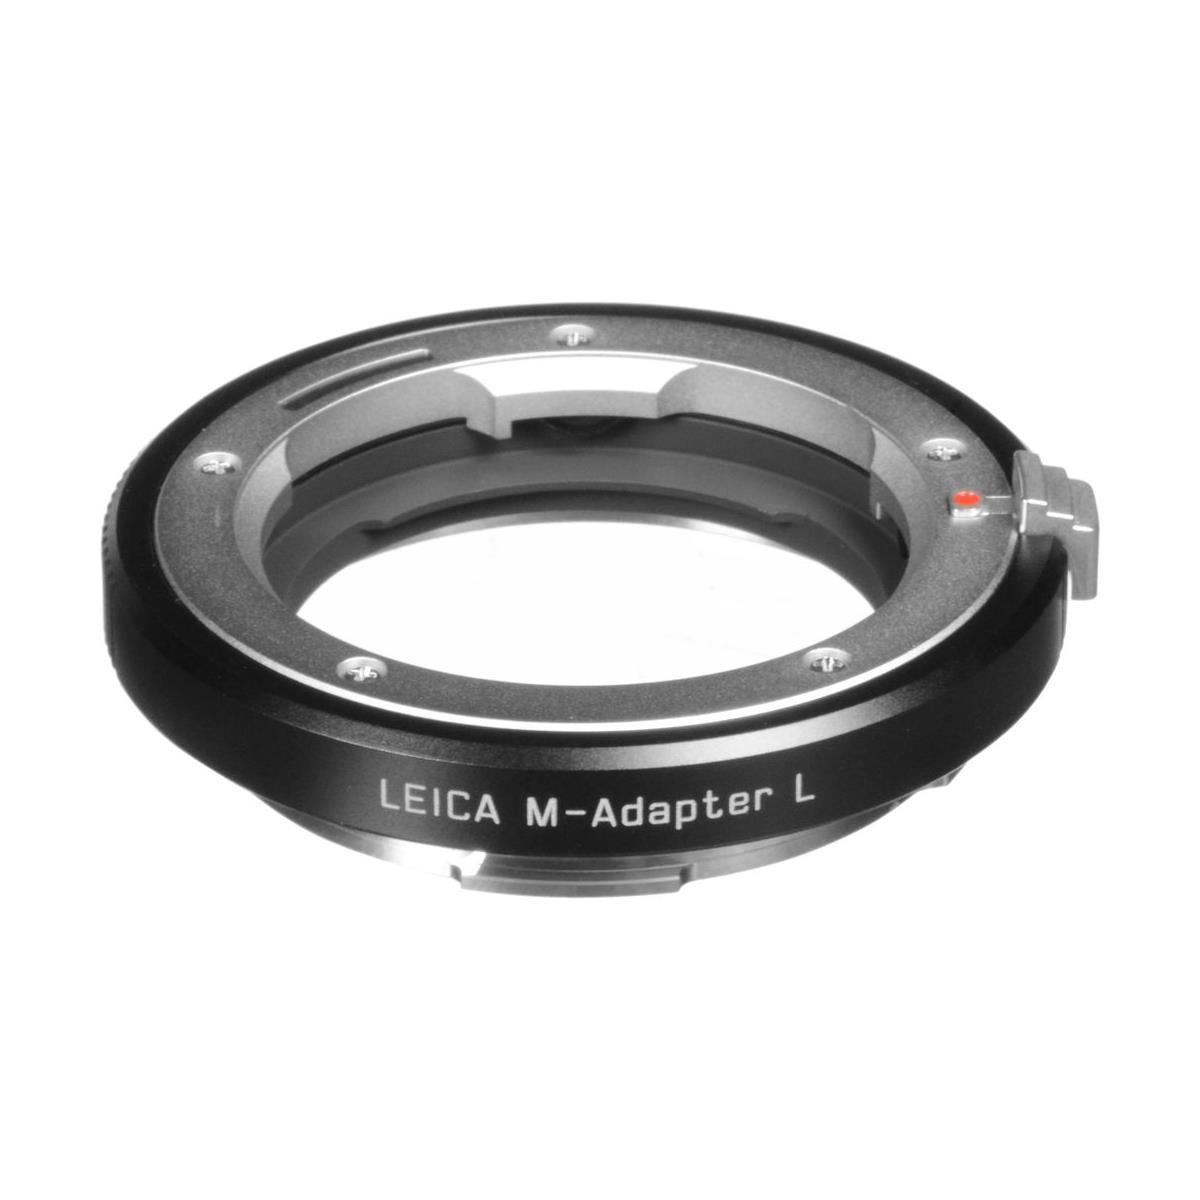 Image of Leica M-Adapter-L Black